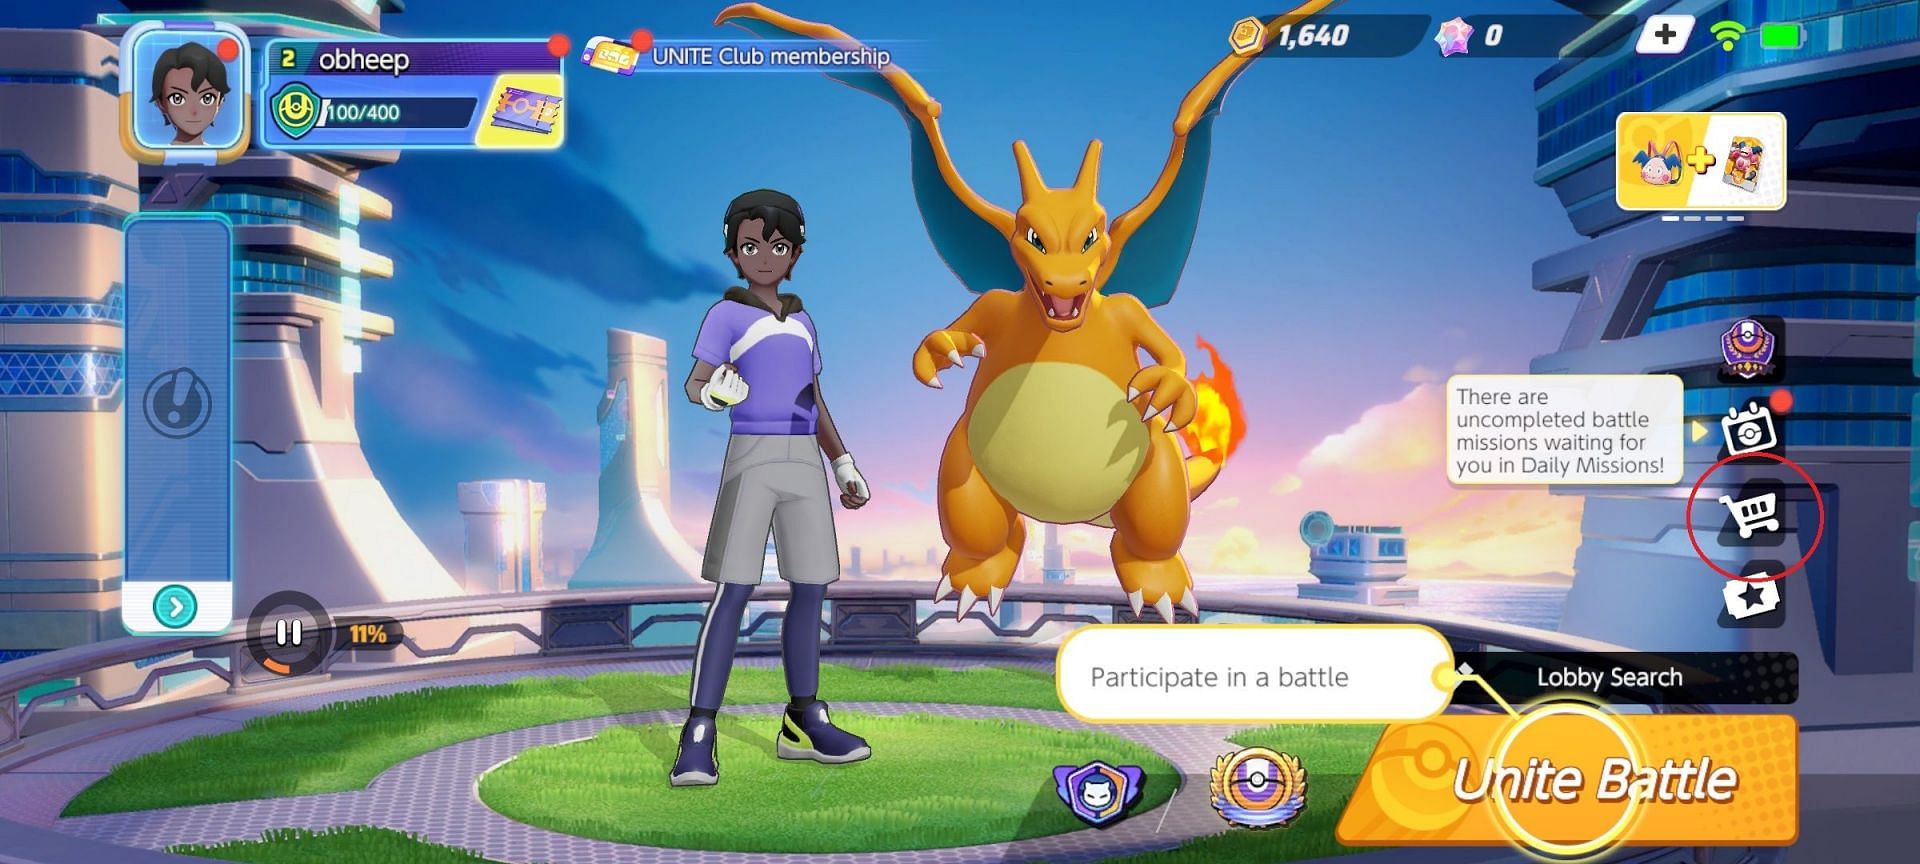 Homepage of the game contains the Shop icon (Image via the Pokemon Company)